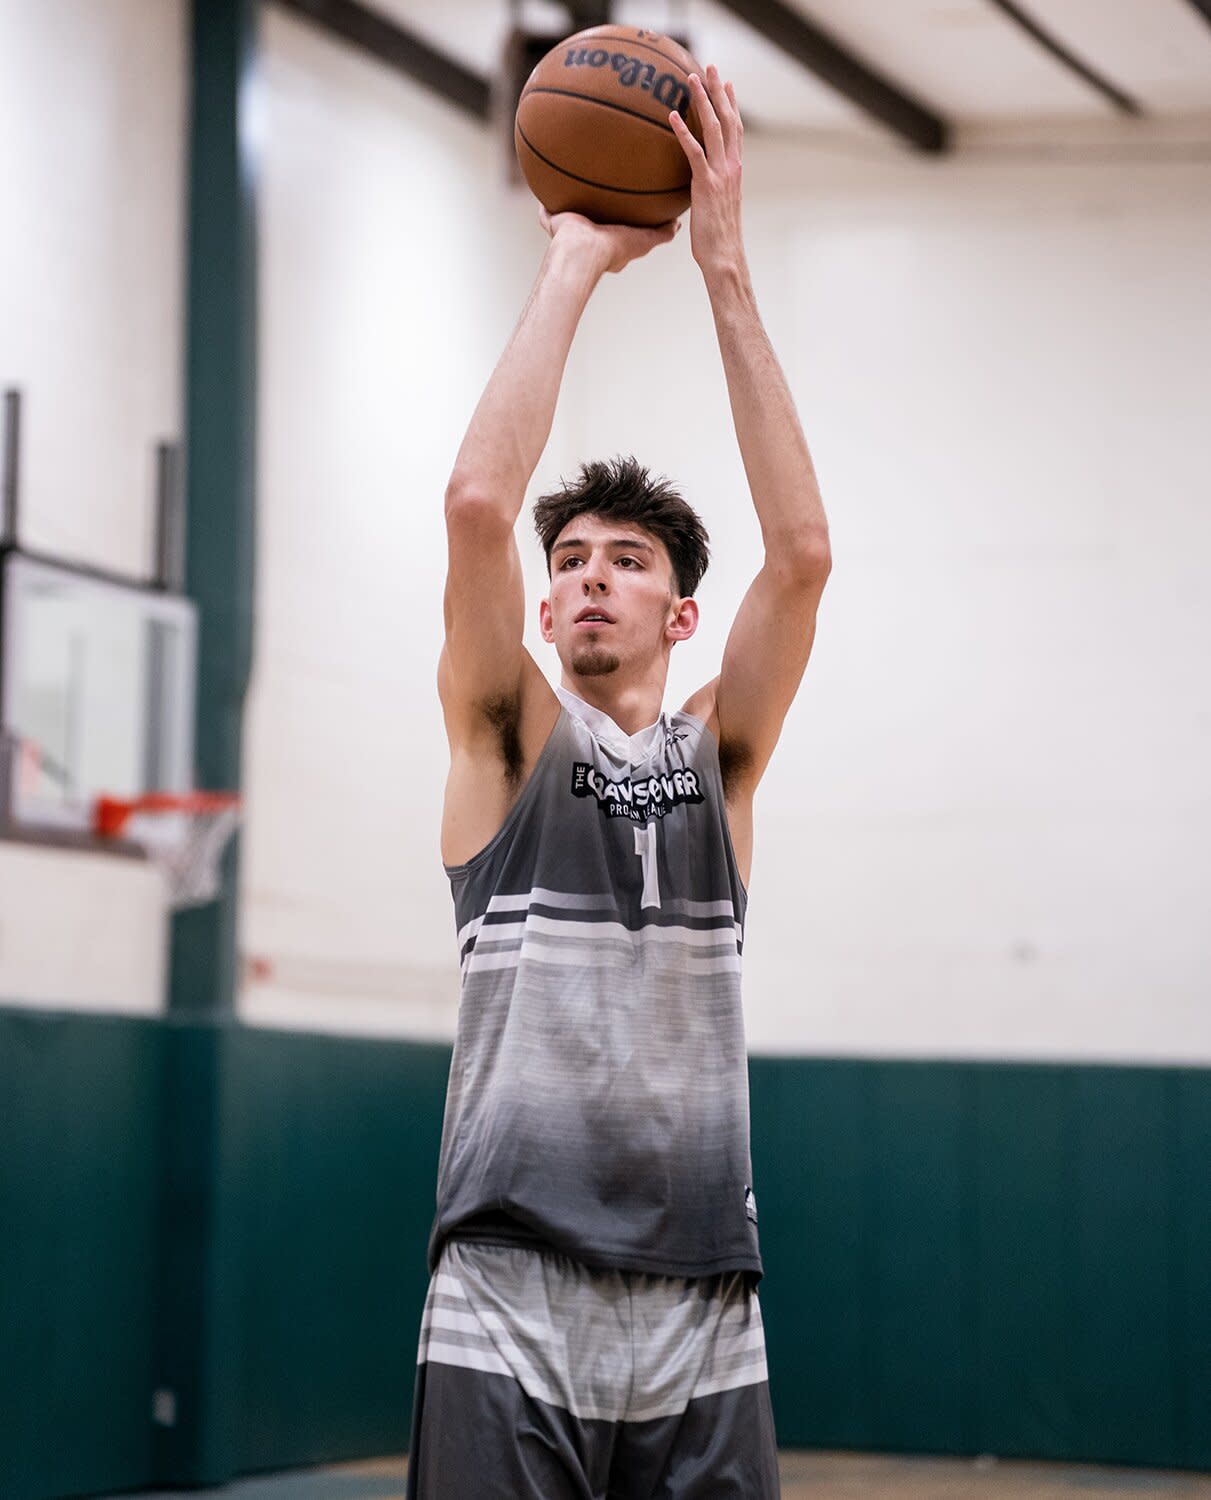 Chet Holmgren warms up before the CrawsOver Pro-Am game at Seattle Pacific University on August 20, 2022 in Seattle, Washington.